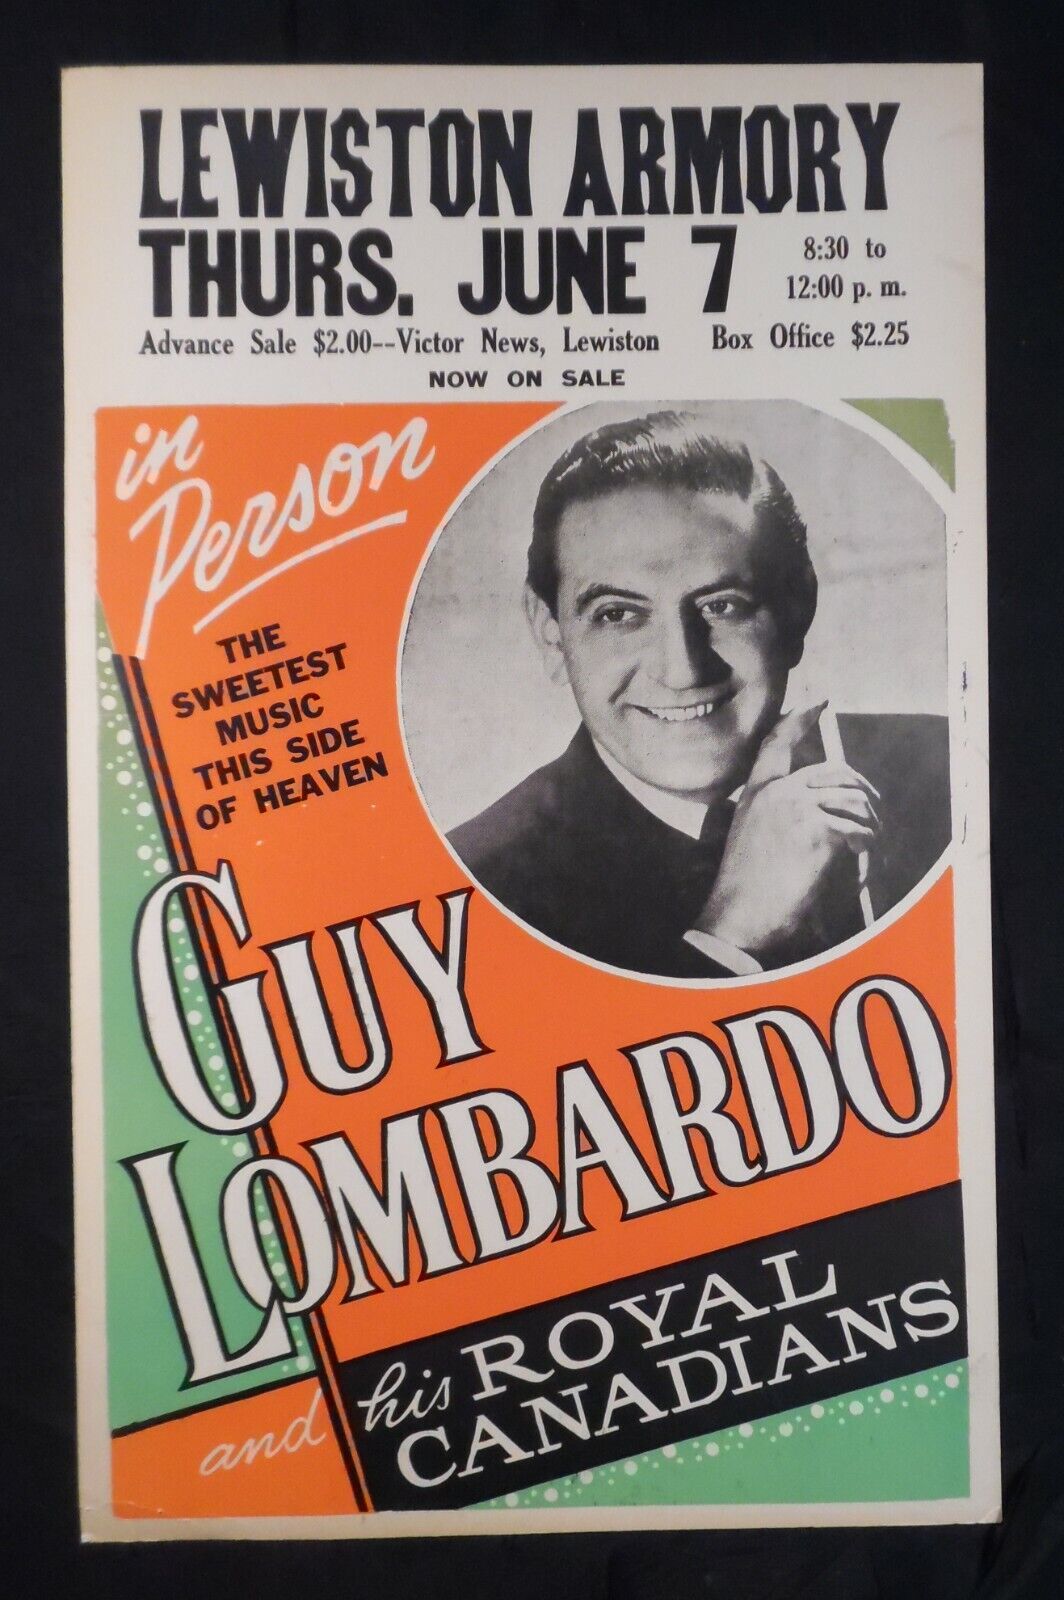 GUY LOMBARDO & HIS ROYALE CANADIANS 1940S BOXING STYLE POSTER,  Lewiston, Maine